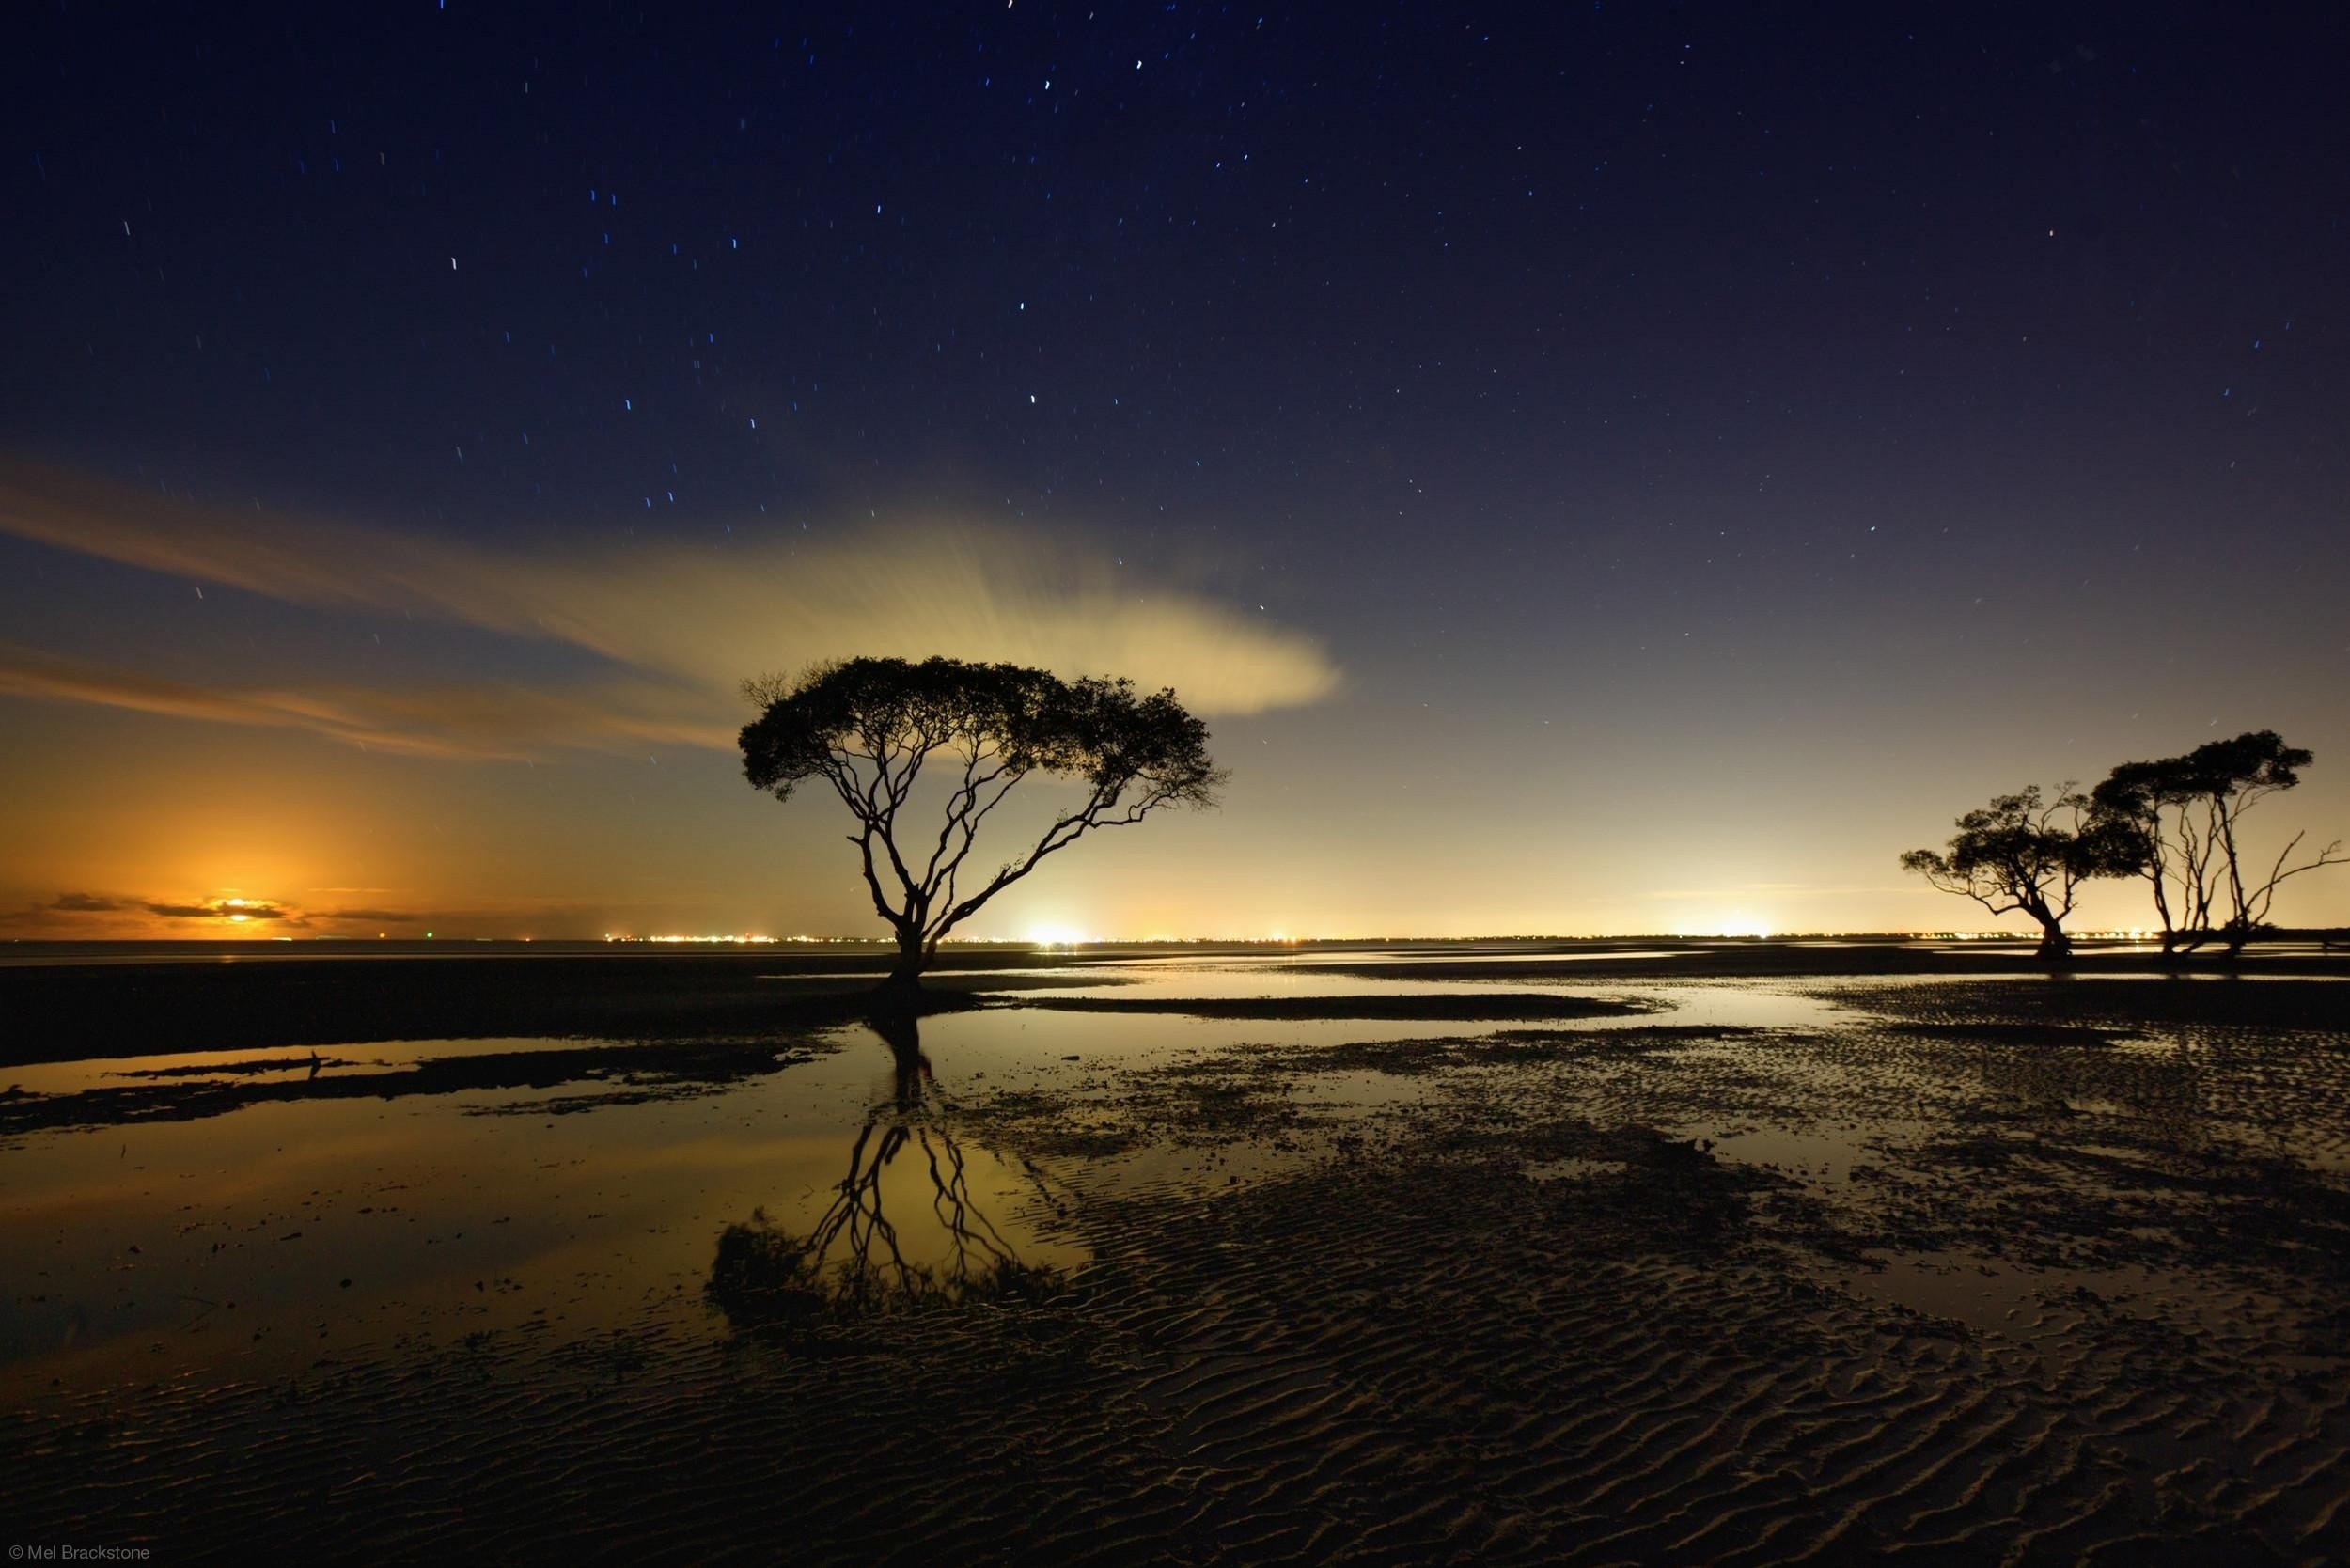 General 2500x1668 nature landscape starry night moonlight trees clouds water reflection New Zealand sky